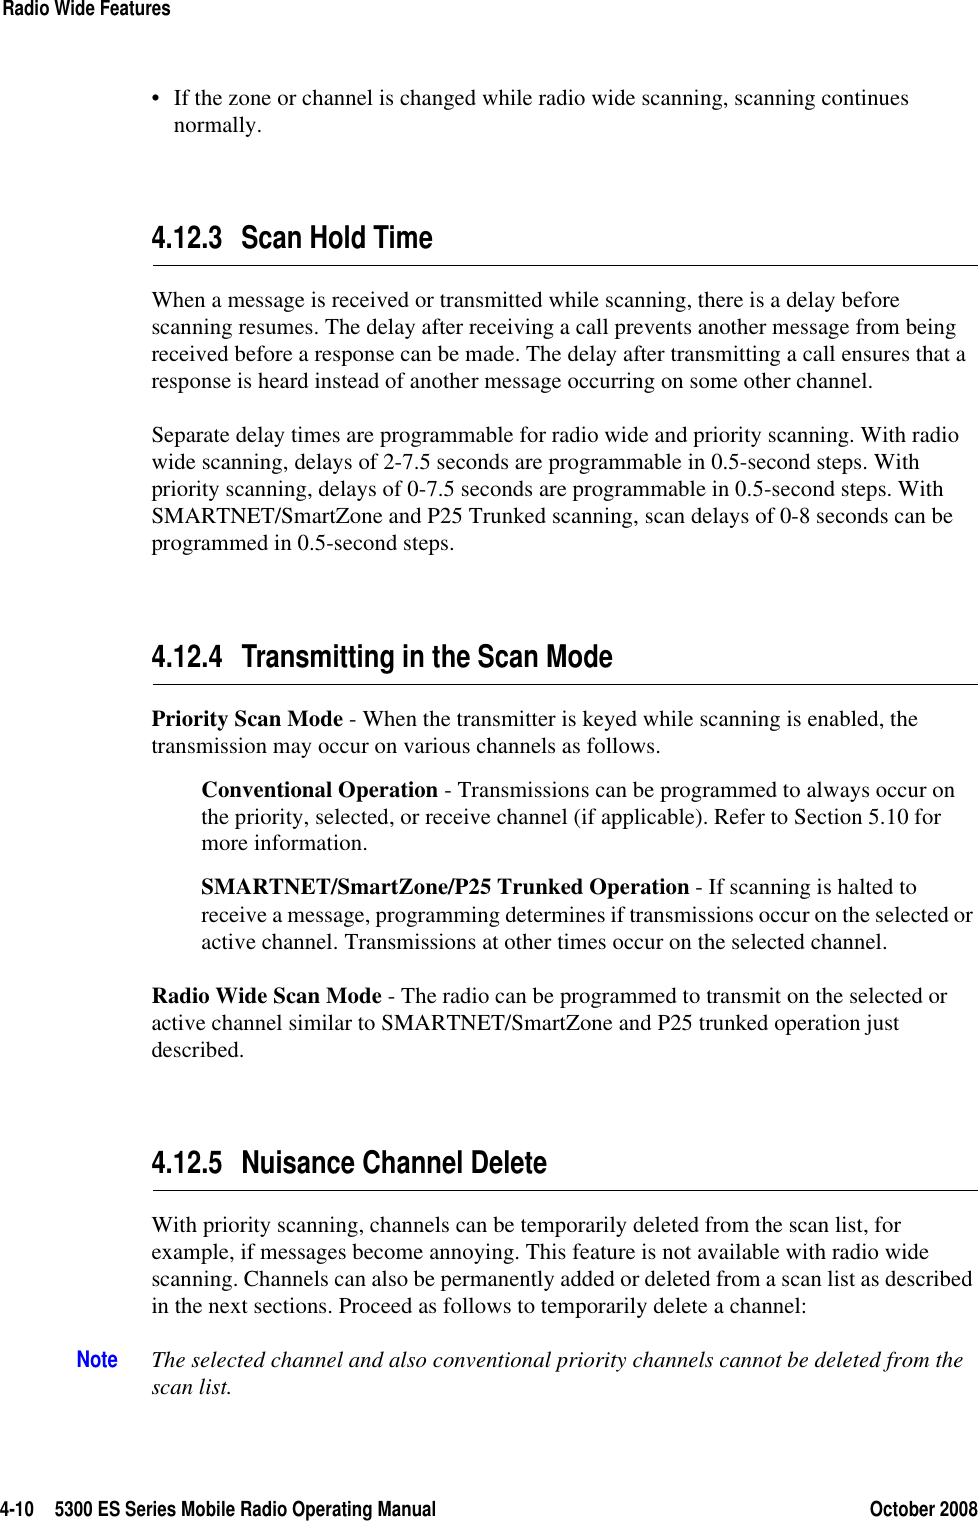 4-10 5300 ES Series Mobile Radio Operating Manual October 2008Radio Wide Features• If the zone or channel is changed while radio wide scanning, scanning continues normally.4.12.3 Scan Hold TimeWhen a message is received or transmitted while scanning, there is a delay before scanning resumes. The delay after receiving a call prevents another message from being received before a response can be made. The delay after transmitting a call ensures that a response is heard instead of another message occurring on some other channel.Separate delay times are programmable for radio wide and priority scanning. With radio wide scanning, delays of 2-7.5 seconds are programmable in 0.5-second steps. With priority scanning, delays of 0-7.5 seconds are programmable in 0.5-second steps. With SMARTNET/SmartZone and P25 Trunked scanning, scan delays of 0-8 seconds can be programmed in 0.5-second steps.4.12.4 Transmitting in the Scan ModePriority Scan Mode - When the transmitter is keyed while scanning is enabled, the transmission may occur on various channels as follows.Conventional Operation - Transmissions can be programmed to always occur on the priority, selected, or receive channel (if applicable). Refer to Section 5.10 for more information.SMARTNET/SmartZone/P25 Trunked Operation - If scanning is halted to receive a message, programming determines if transmissions occur on the selected or active channel. Transmissions at other times occur on the selected channel.Radio Wide Scan Mode - The radio can be programmed to transmit on the selected or active channel similar to SMARTNET/SmartZone and P25 trunked operation just described.4.12.5 Nuisance Channel DeleteWith priority scanning, channels can be temporarily deleted from the scan list, for example, if messages become annoying. This feature is not available with radio wide scanning. Channels can also be permanently added or deleted from a scan list as described in the next sections. Proceed as follows to temporarily delete a channel:Note The selected channel and also conventional priority channels cannot be deleted from the scan list.